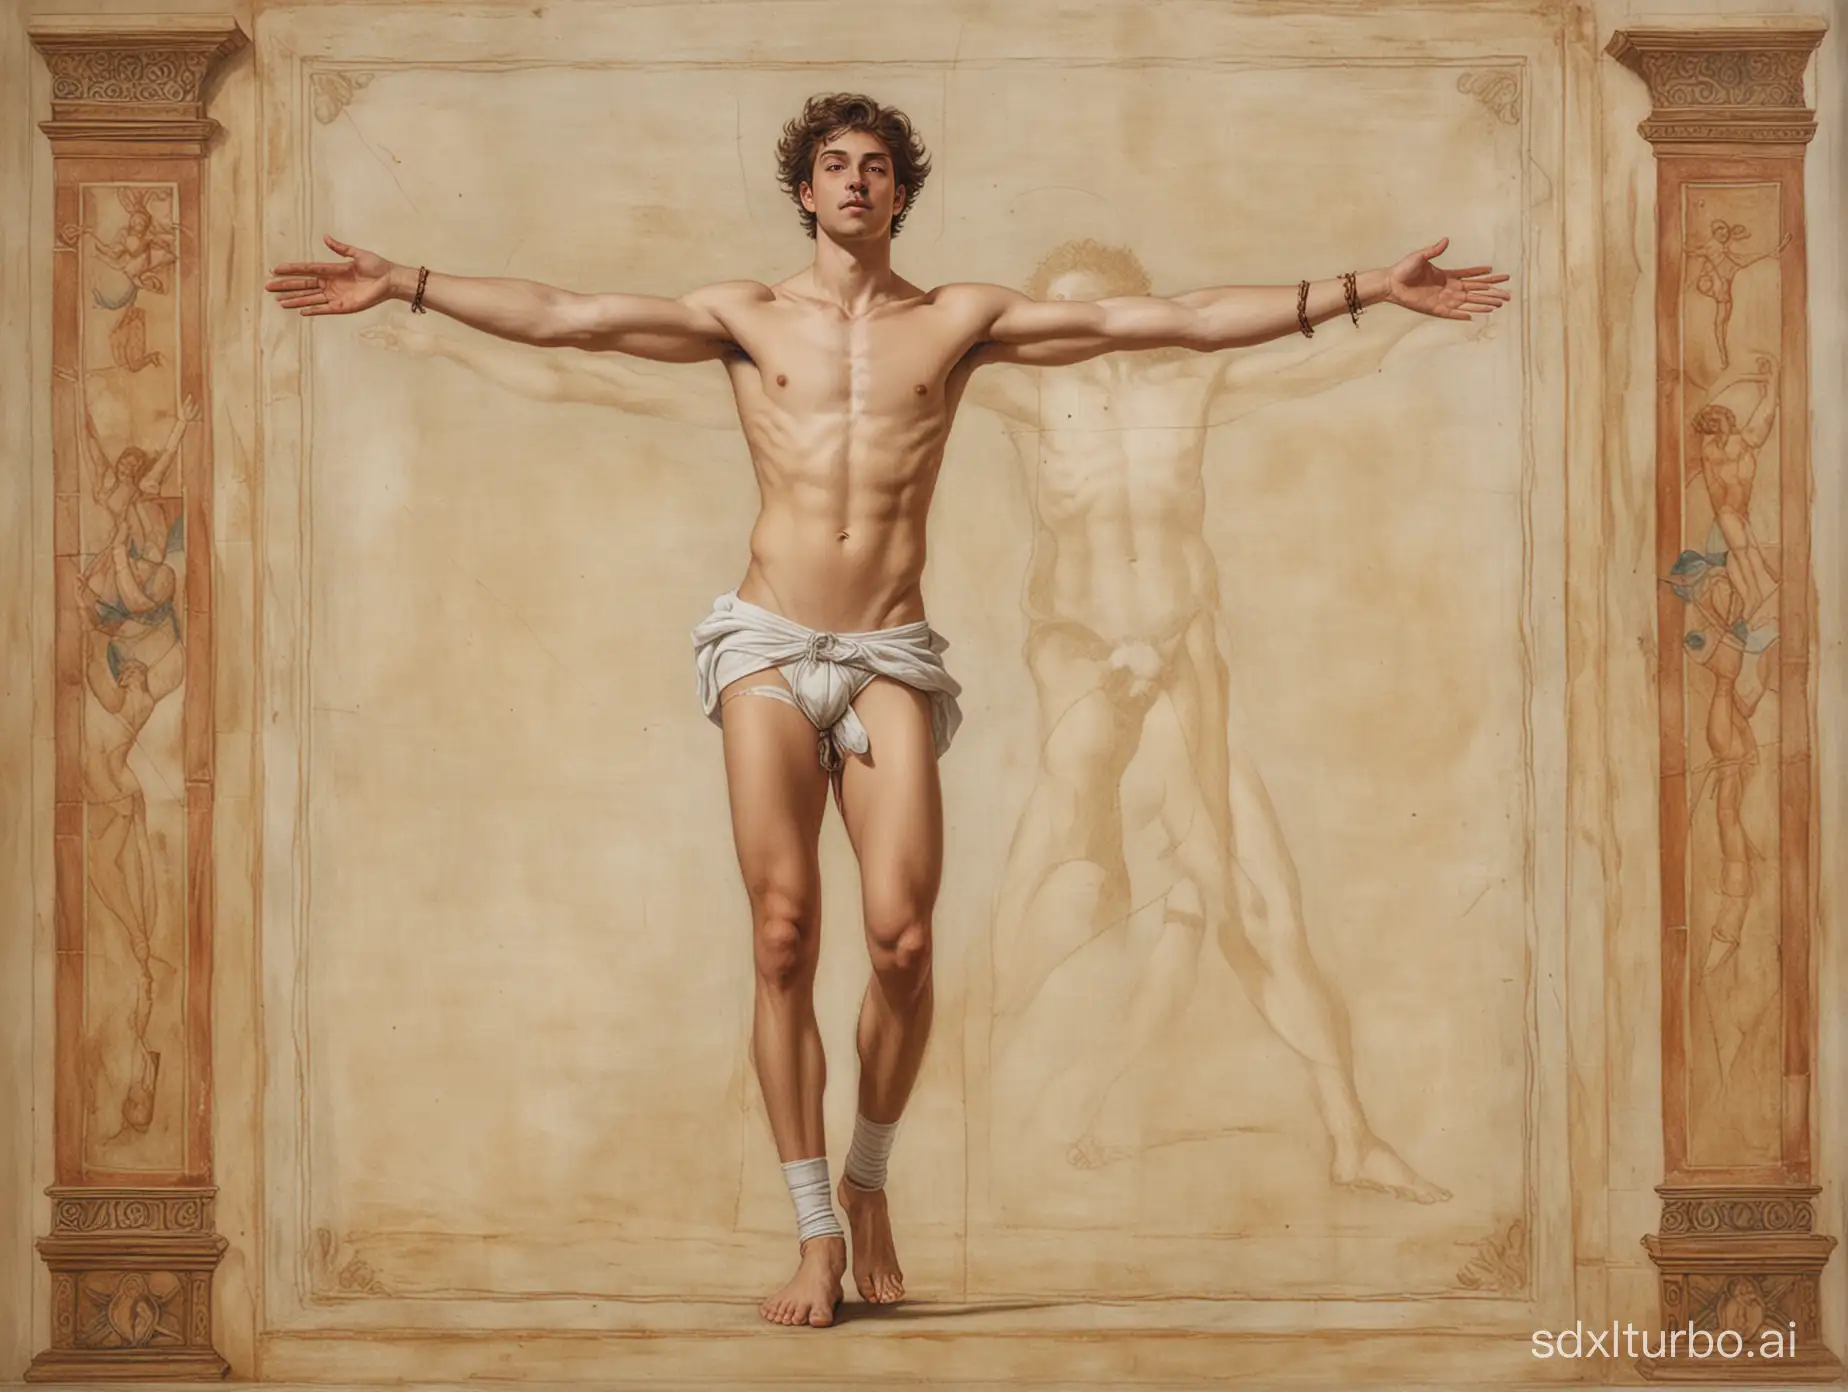 renaissance painting of a modern day young man standing with his arms and legs outstretched like the vitruvian man, the young man wearing underpants and a crop top